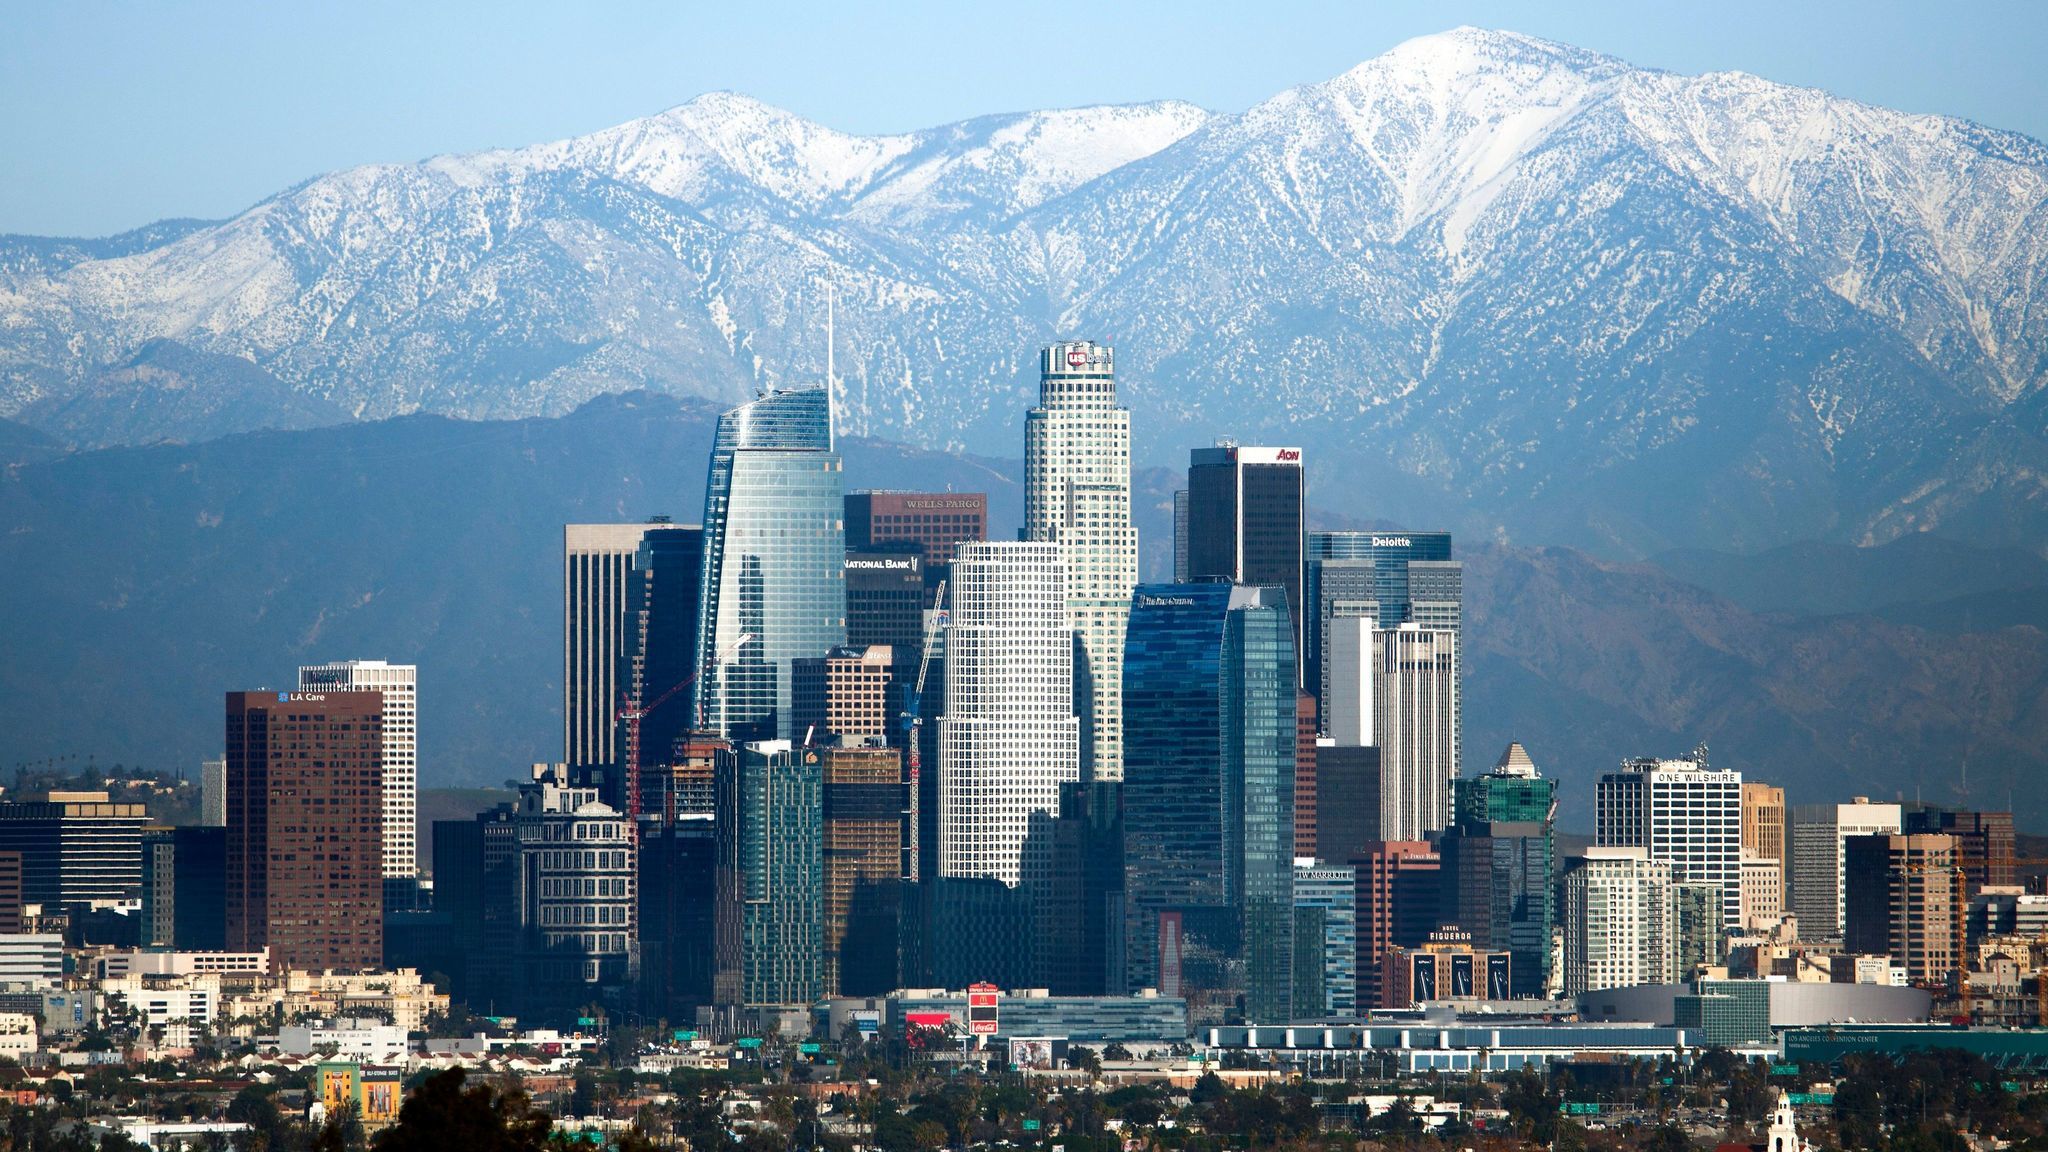 Everyone loves L.A. — and that's the problem